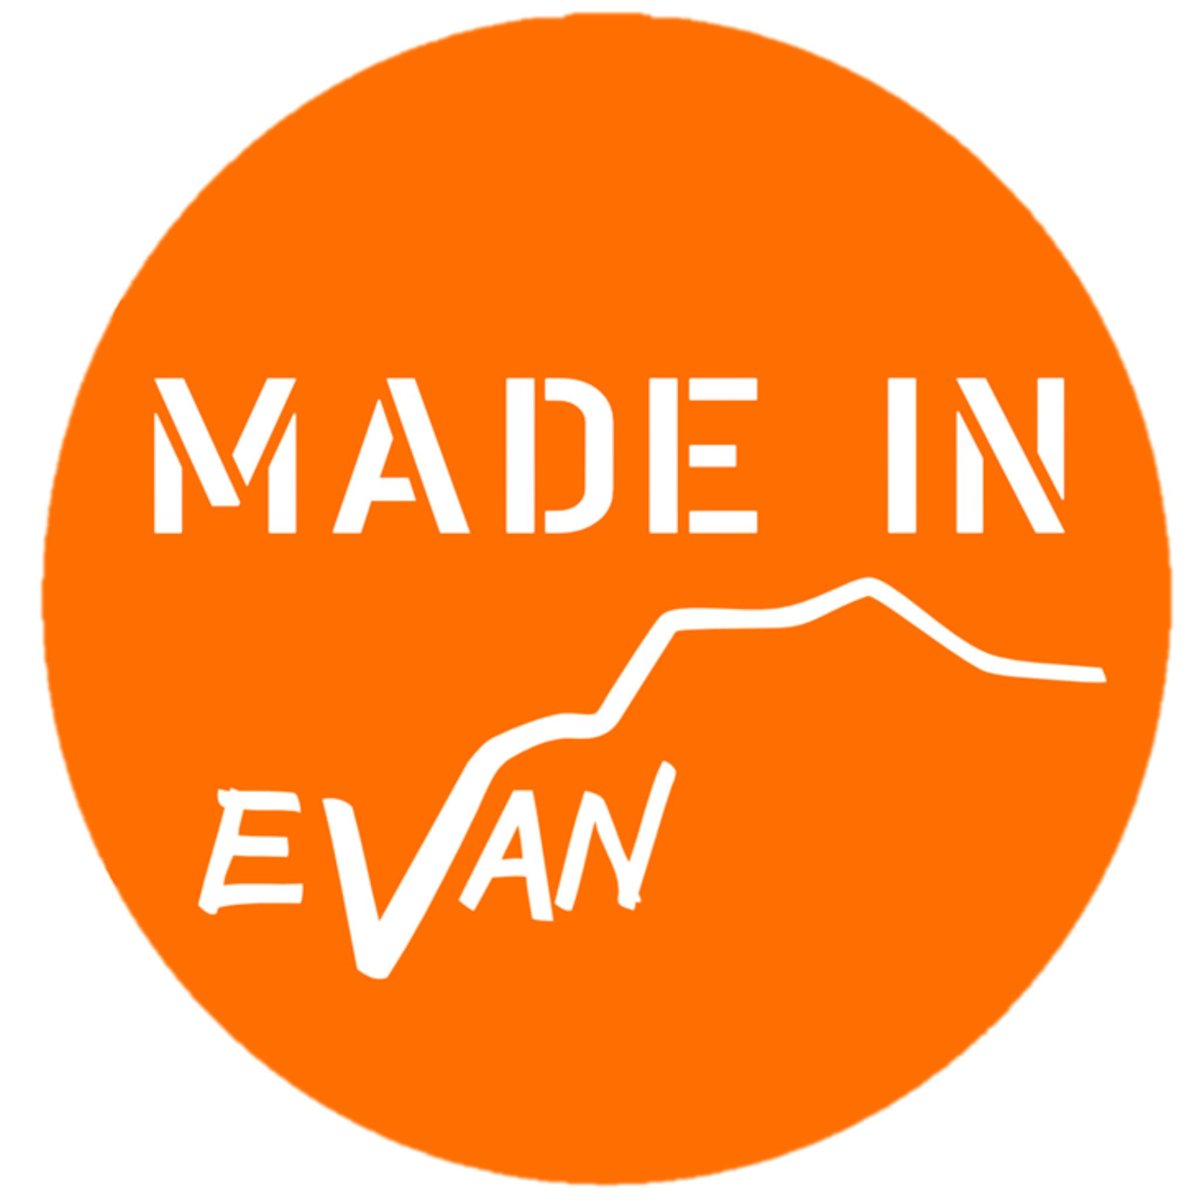 EVAN's spring open exhibition starts on 5 Apr, showcasing work by over 70 artists. Open Mon-Sat 10-4 to 26 Apr at 4 Corney Place, Penrith CA11 7PX. buff.ly/3TSEnnx #artexhibition #MadeinEVAN #Cumbrianart #supportlocalartists #buyhandmade #edenvalleyartisticnetwork